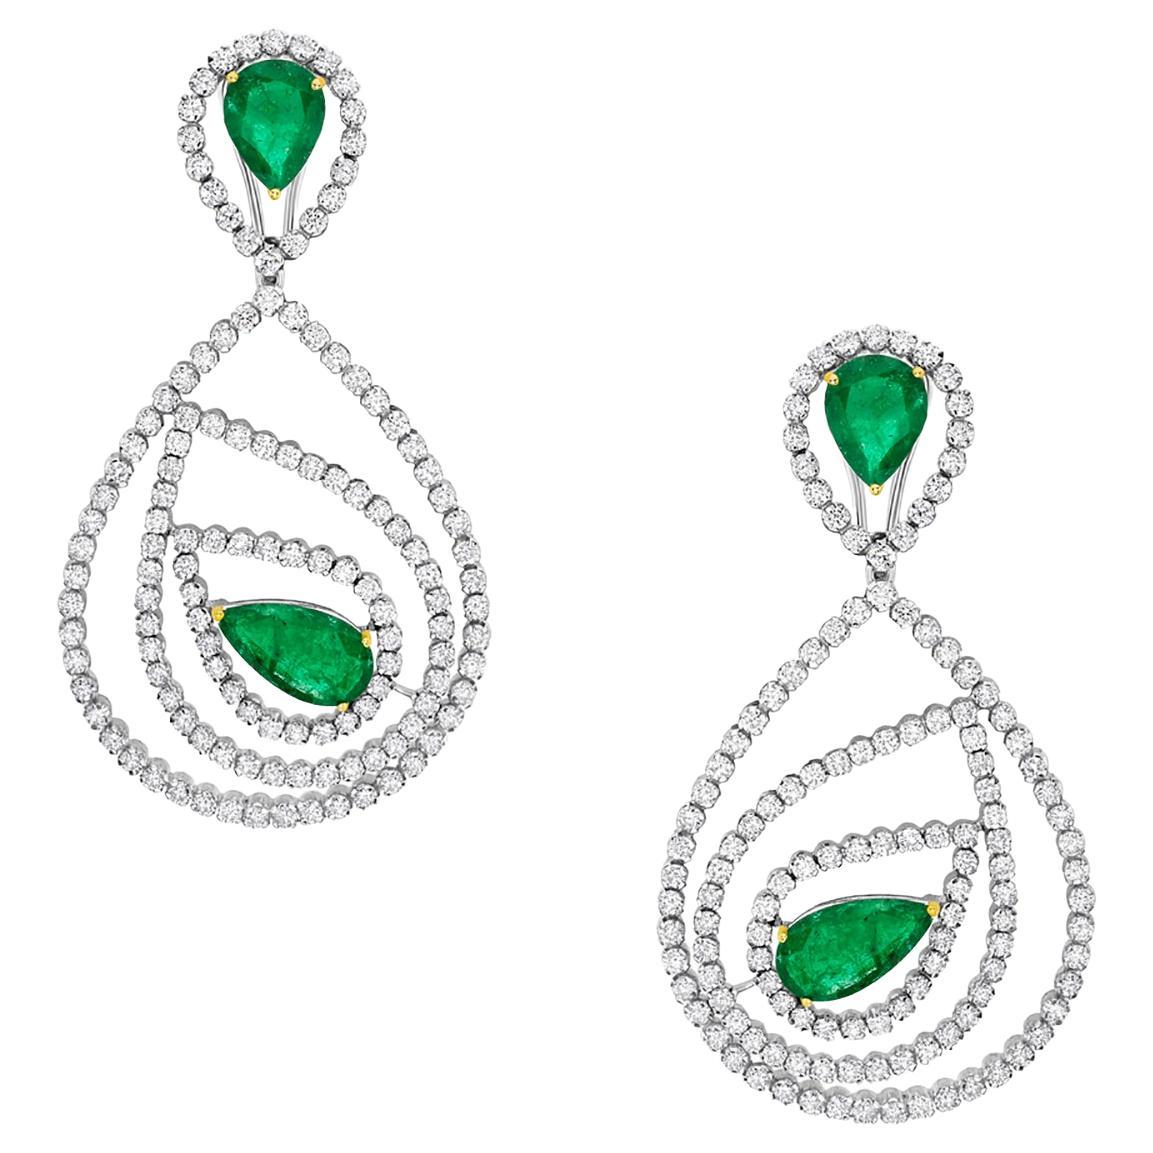 Pear Shaped Emerald Earrings Caged in Diamonds Made in 18k White Gold